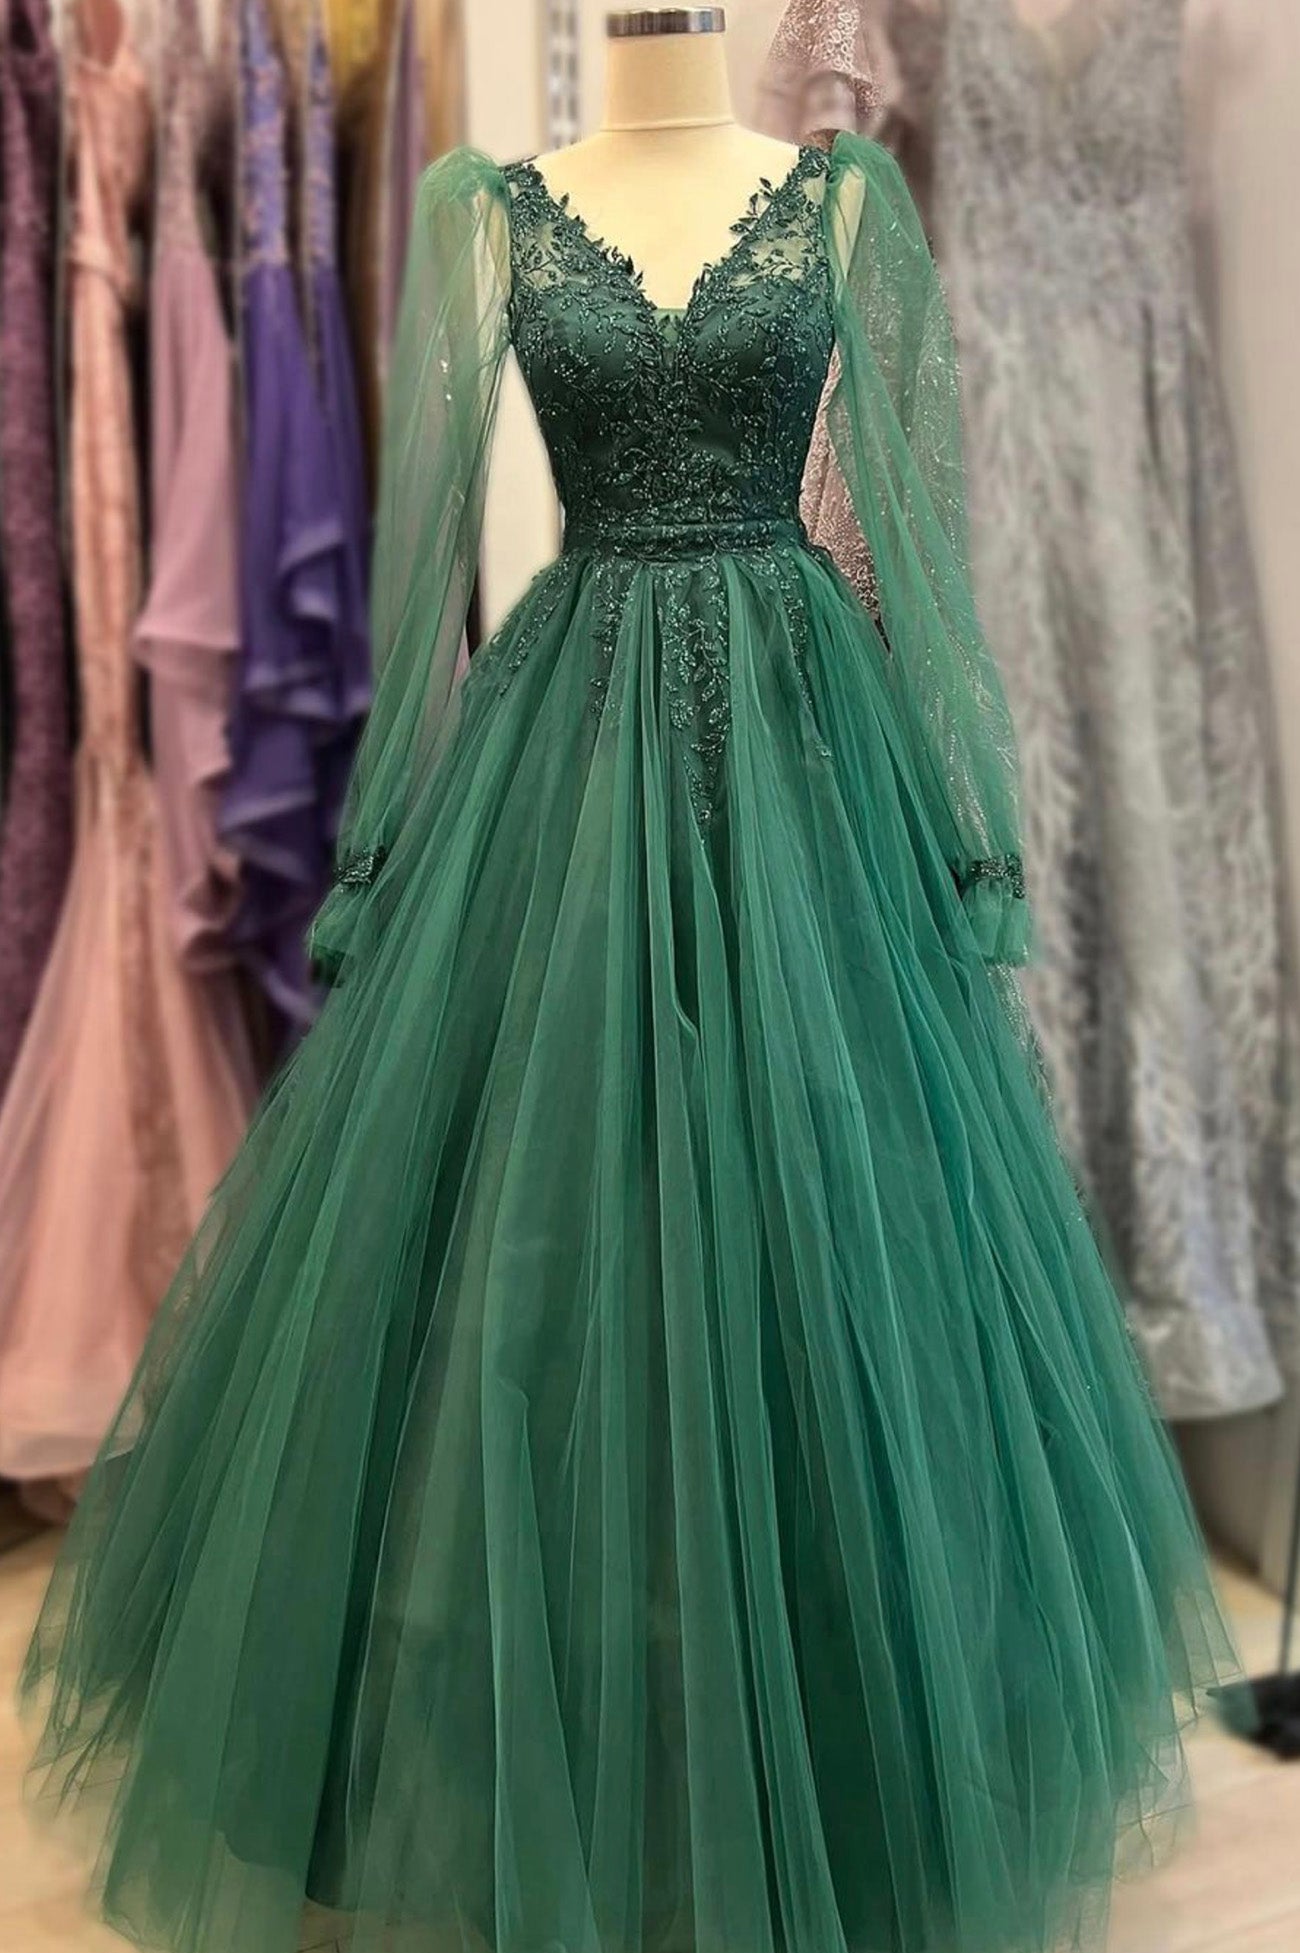 Green V-Neck Tulle Long Corset Prom Dresses, A-Line Long Sleeve Evening Dresses outfit, Prom Dresses Blue Light